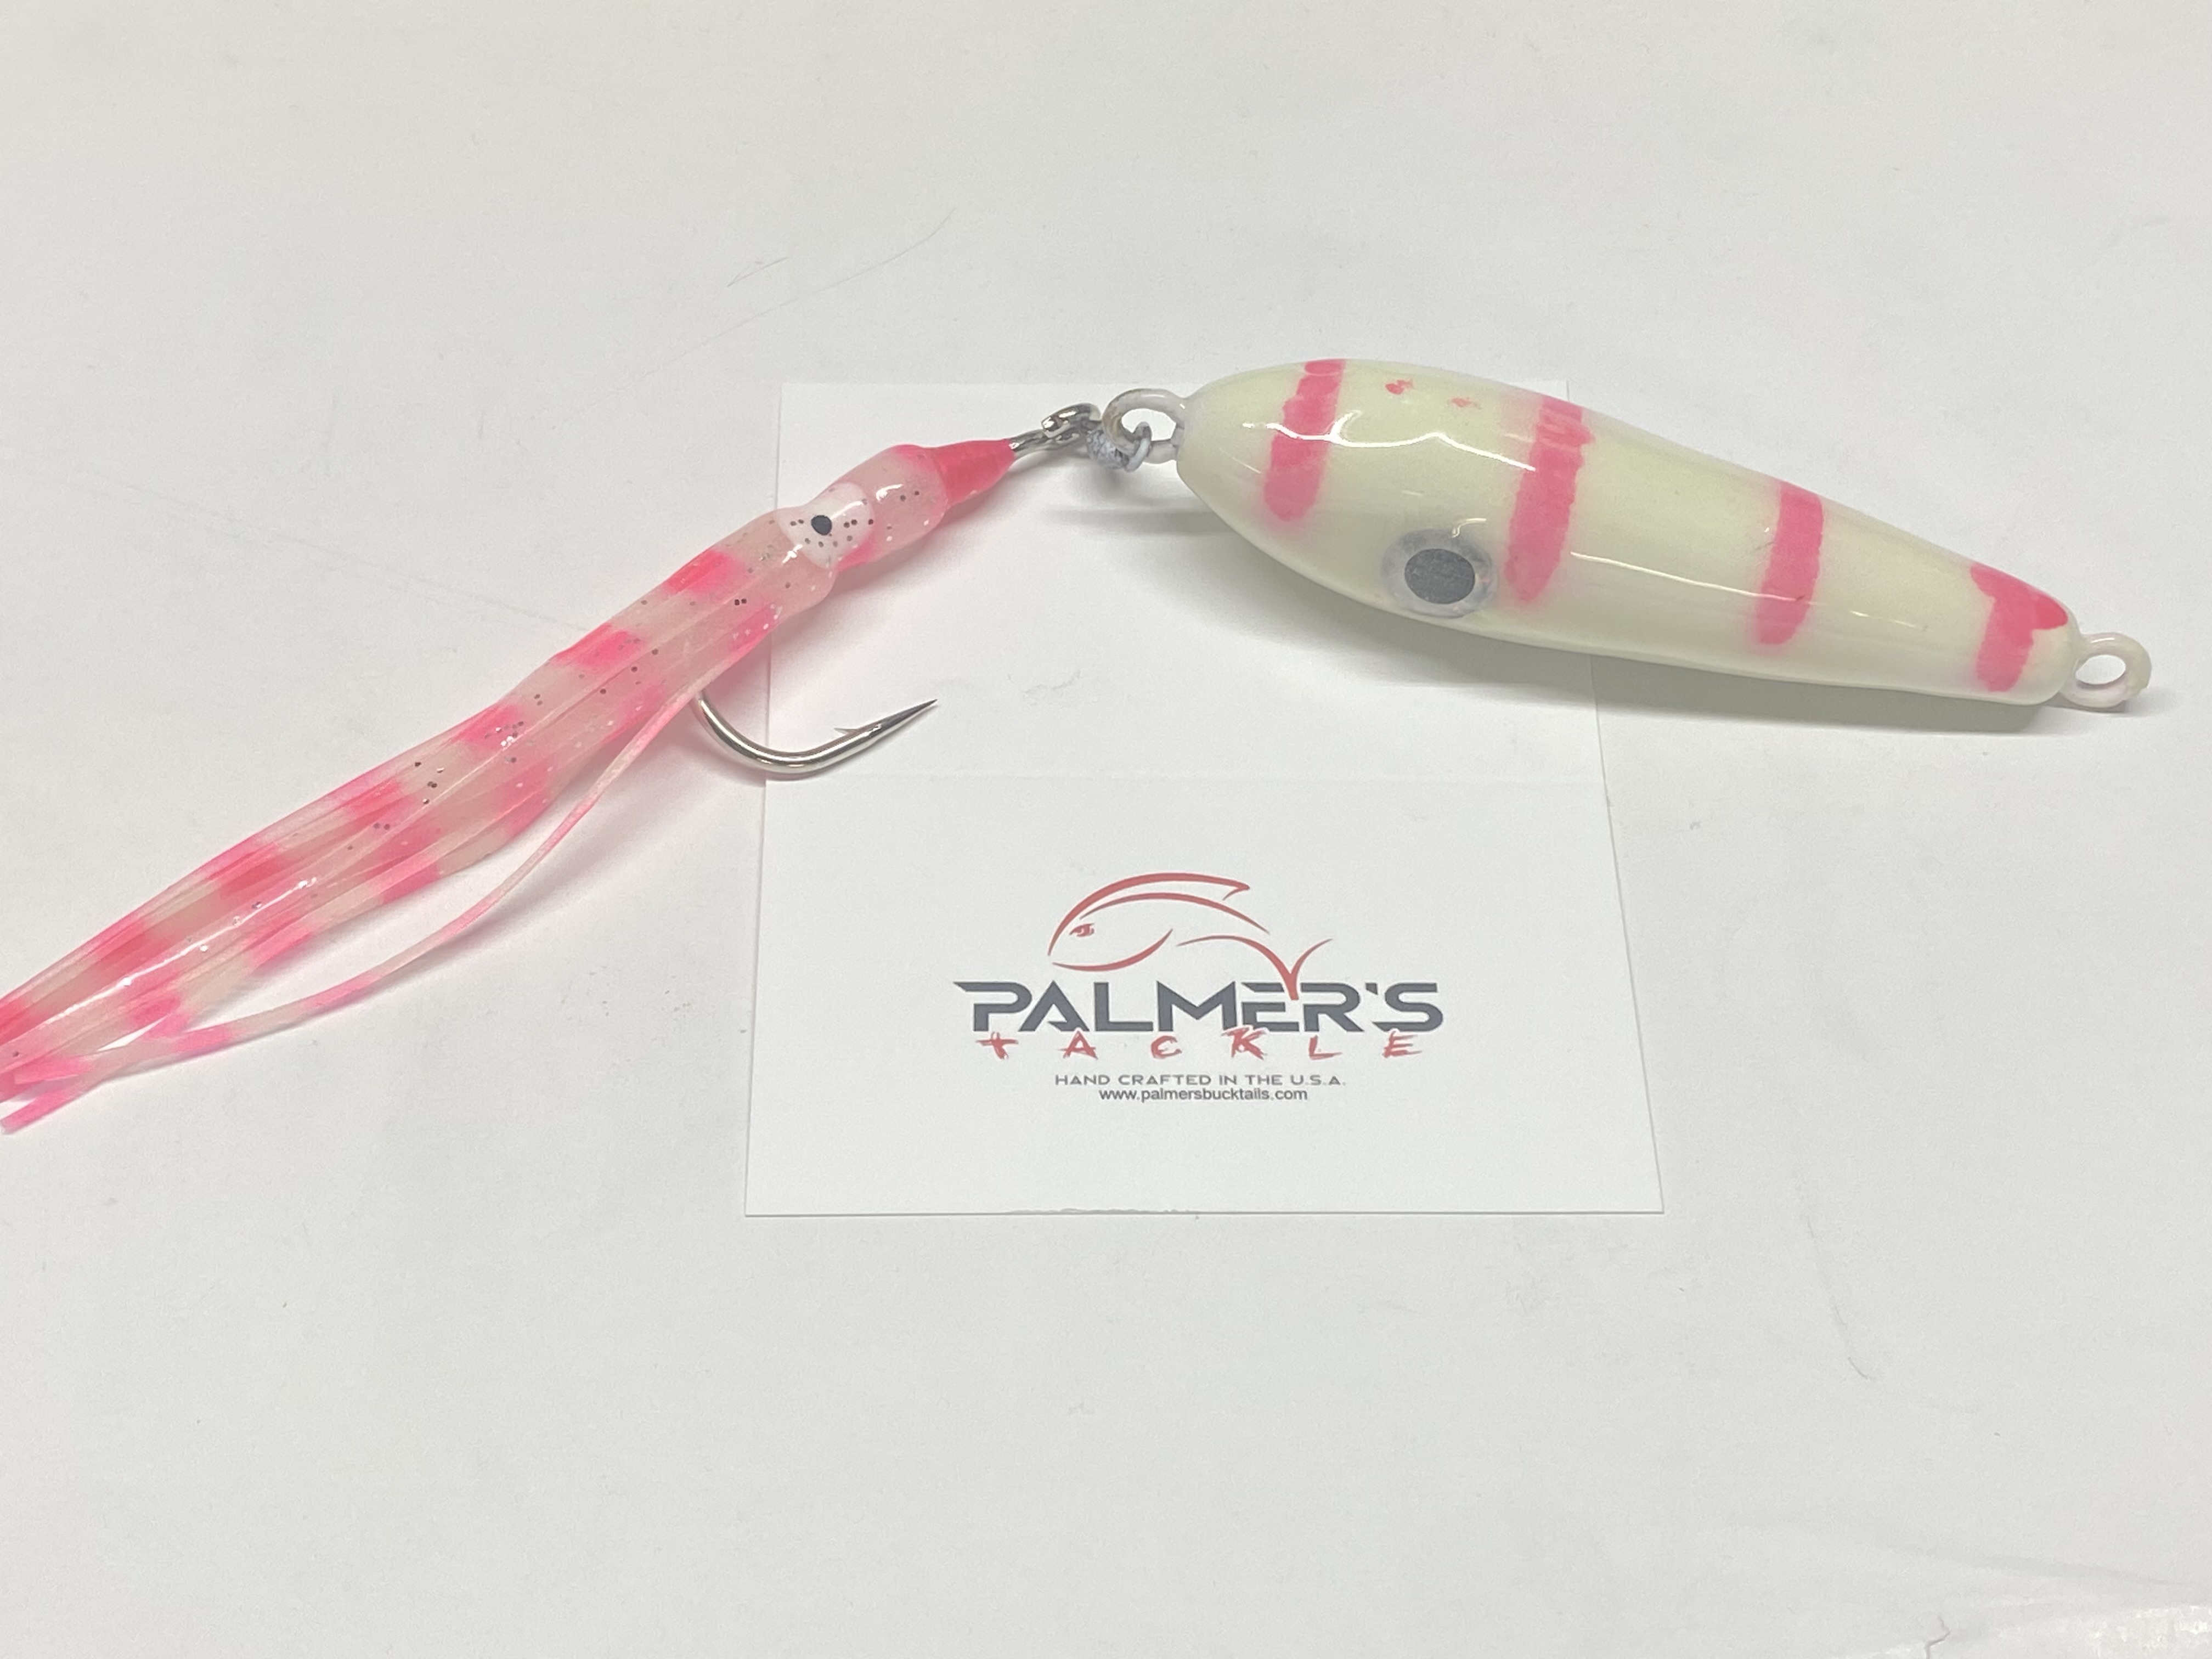 Palmers Bucktails, Palmers Tackle Co., High Quality Saltwater Tackle, Hand  Crafted In USA, Saltwater Lures, Jigs, Bucktails, Round Head Jigs, Gulp Jigs,  Spro Style Jigs, Fluke Jigs, Fluke Rigs, Tog Rigs, Tog